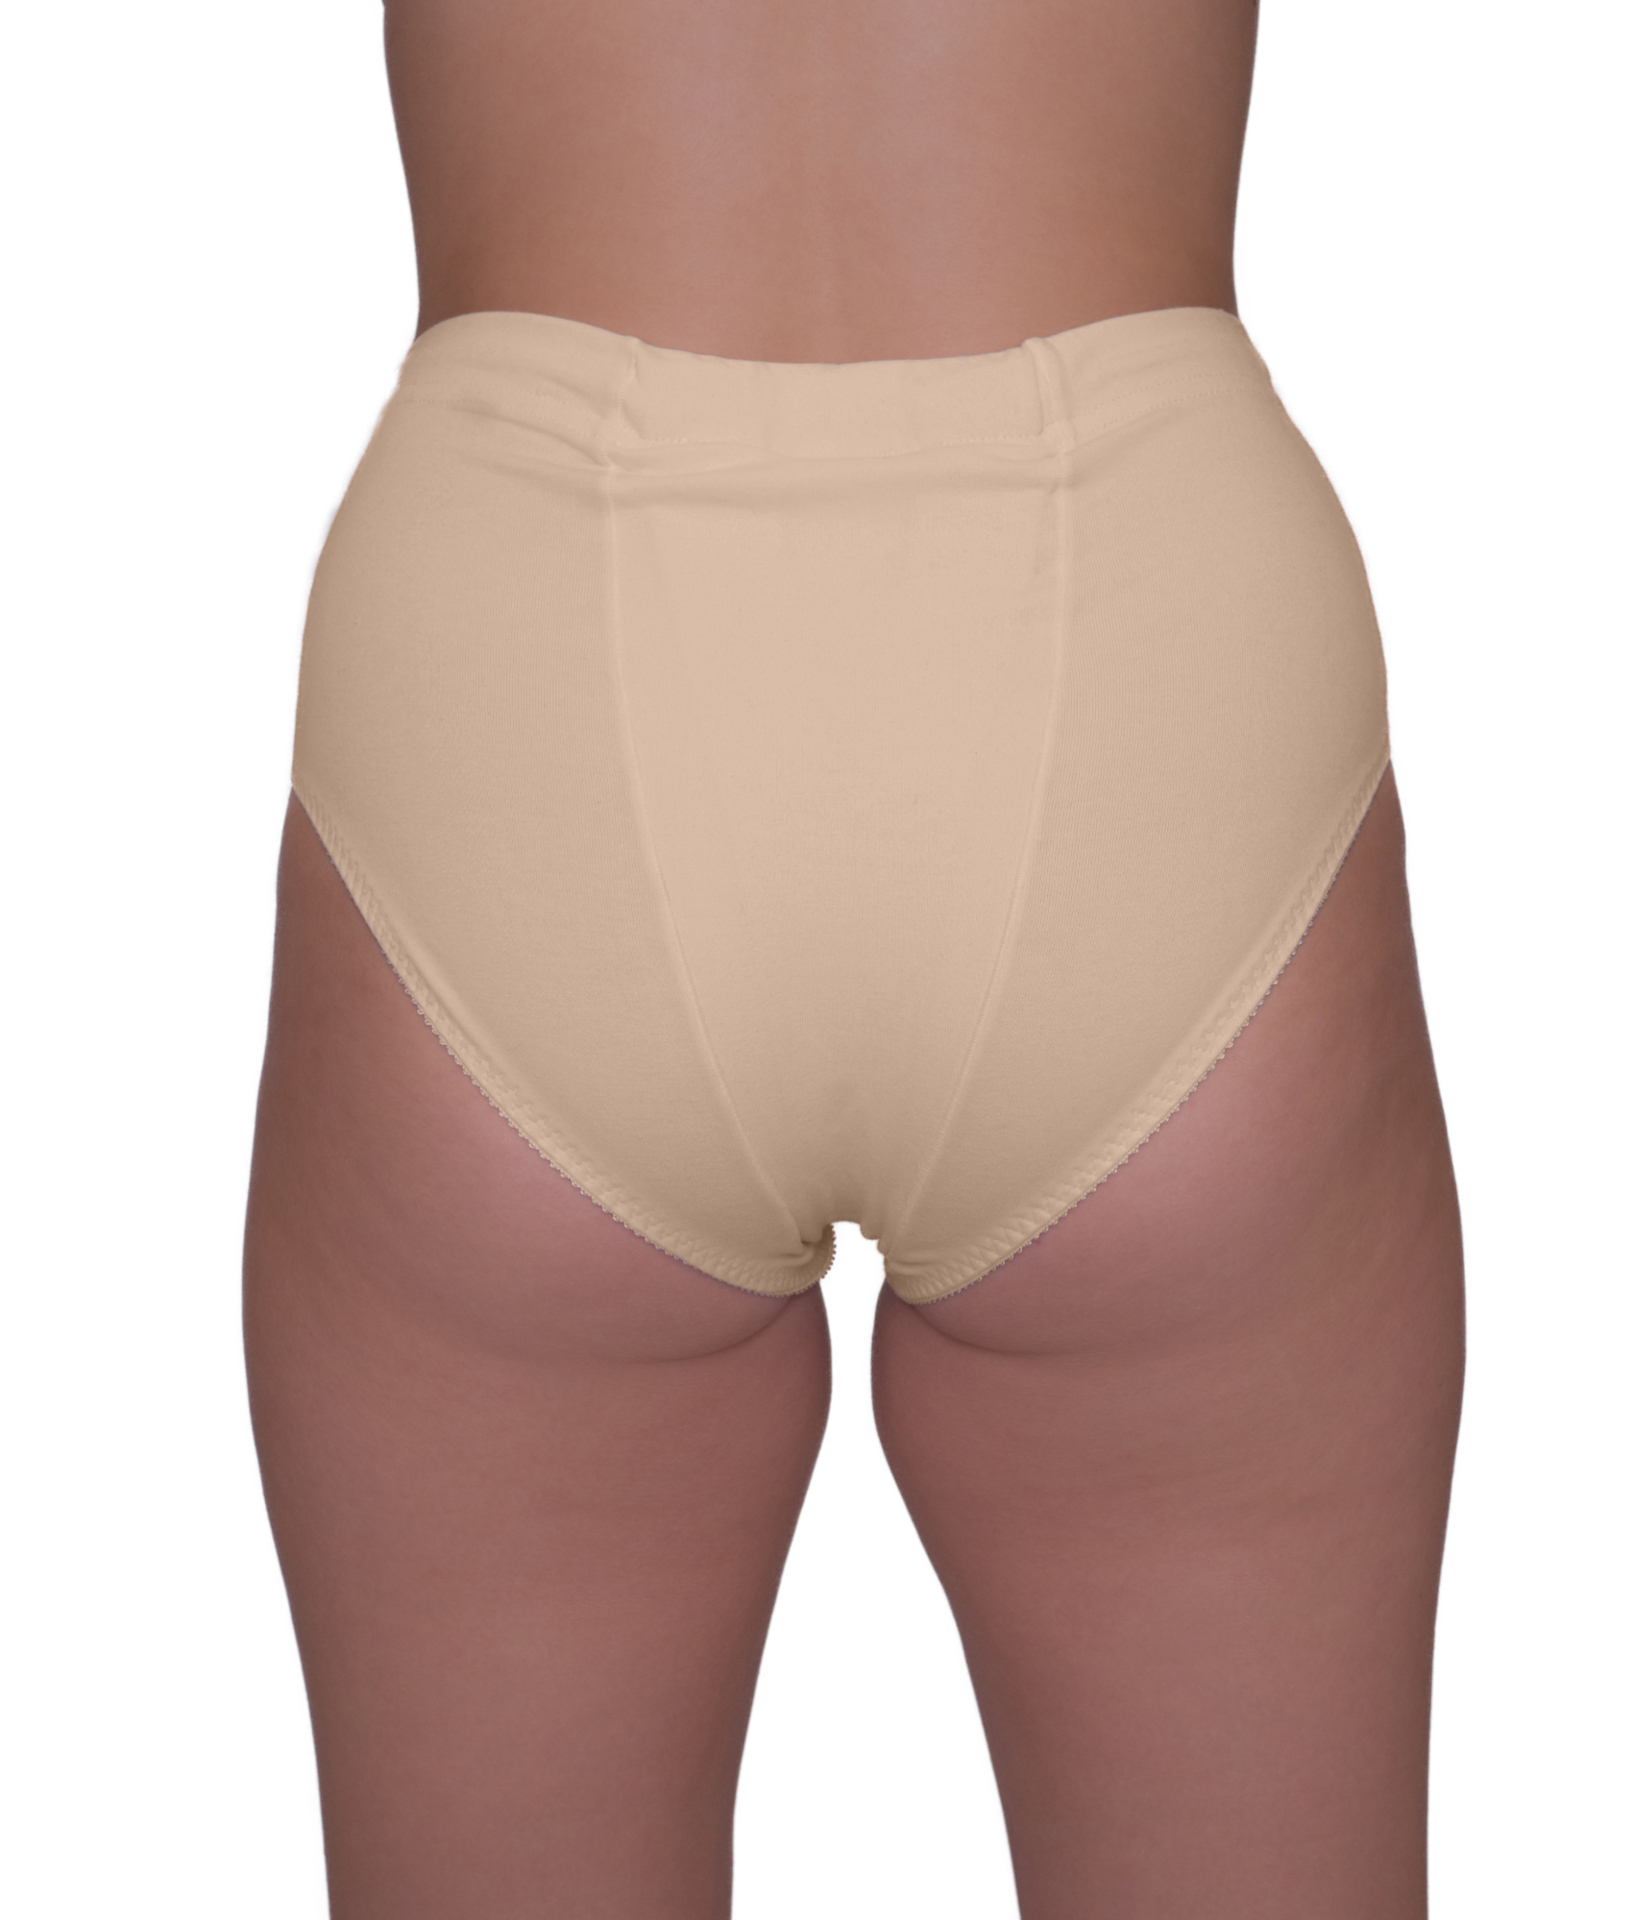 Vulvar Varicosity And Prolapse Support Brief With Groin Compression Bands -  521